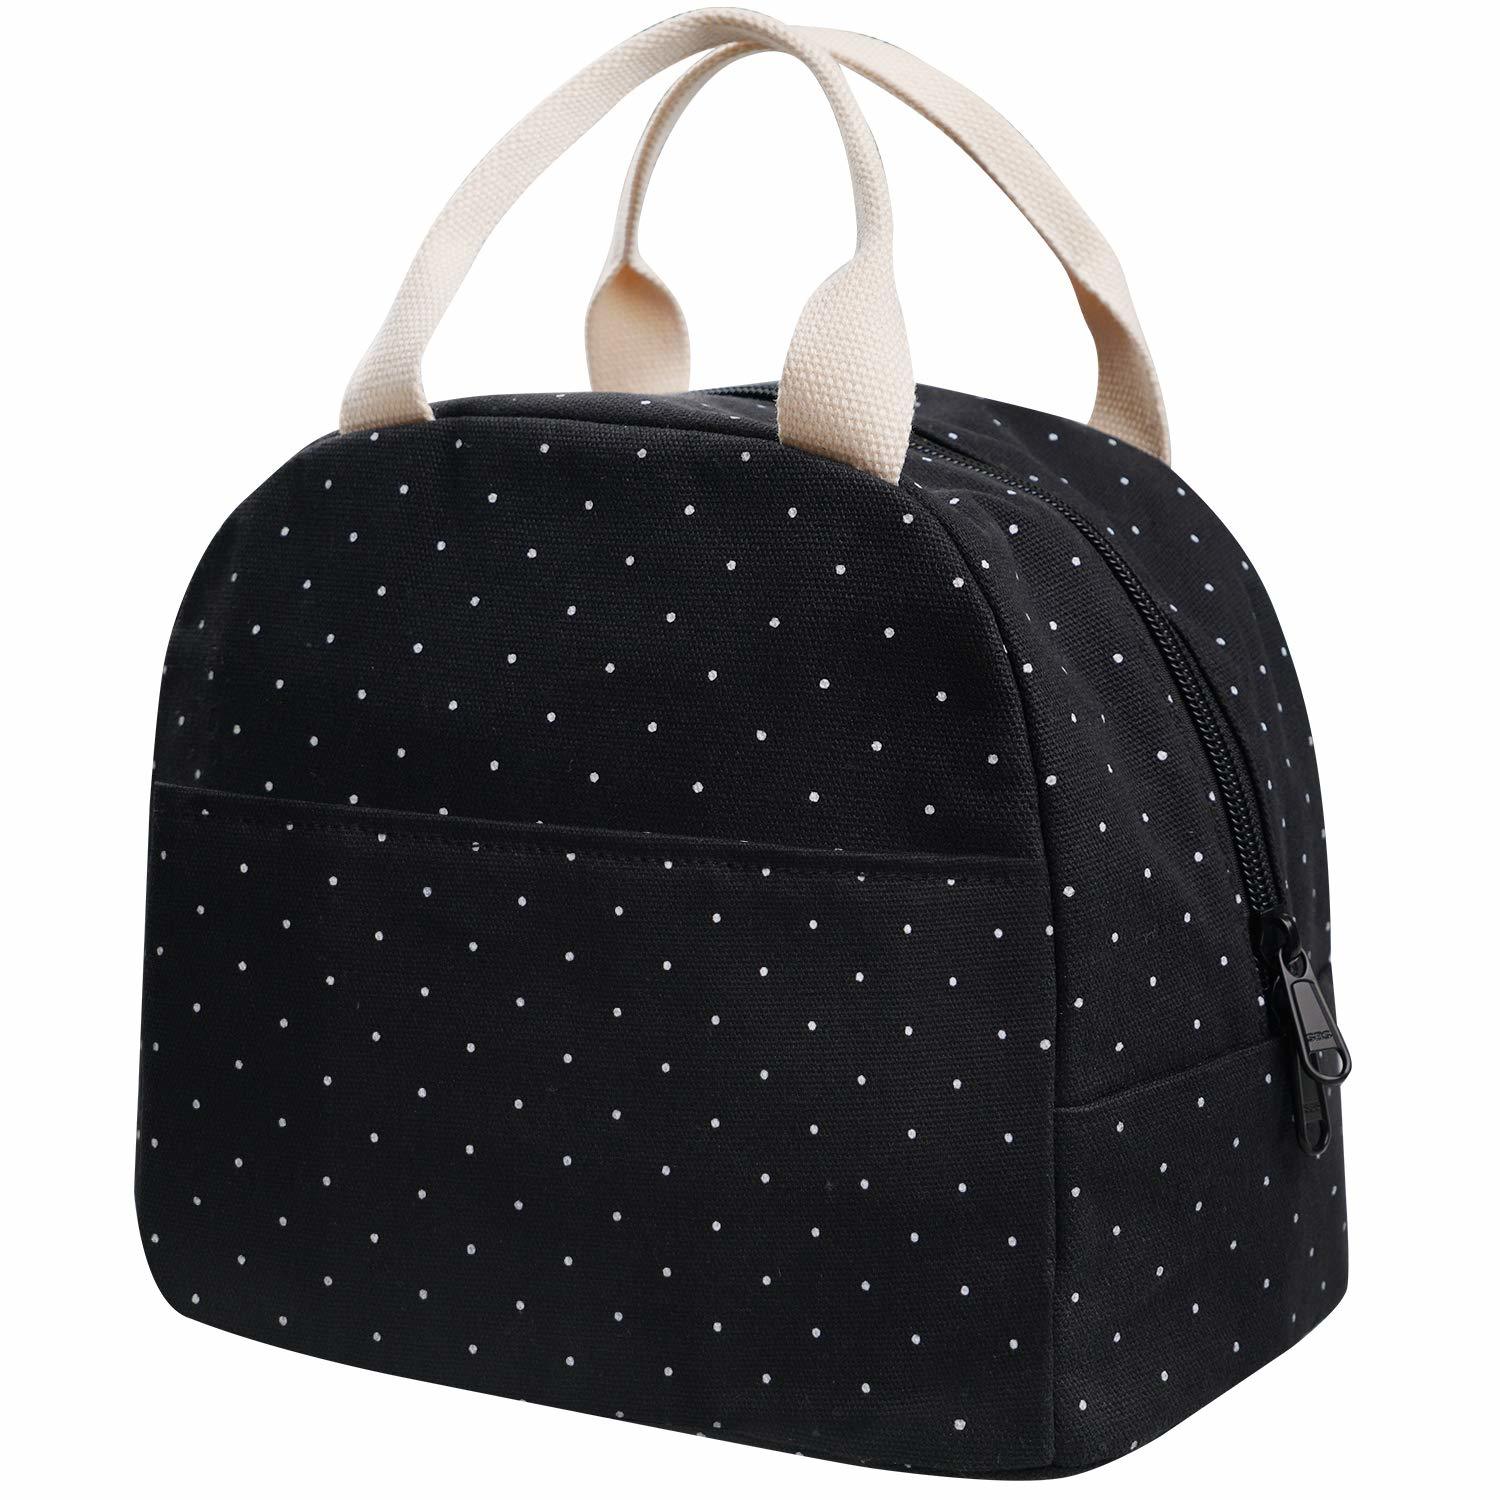 Upgraded Compact Black Lunch Bag For Girls Women,Canvas Reusable Polka Dot Lunch